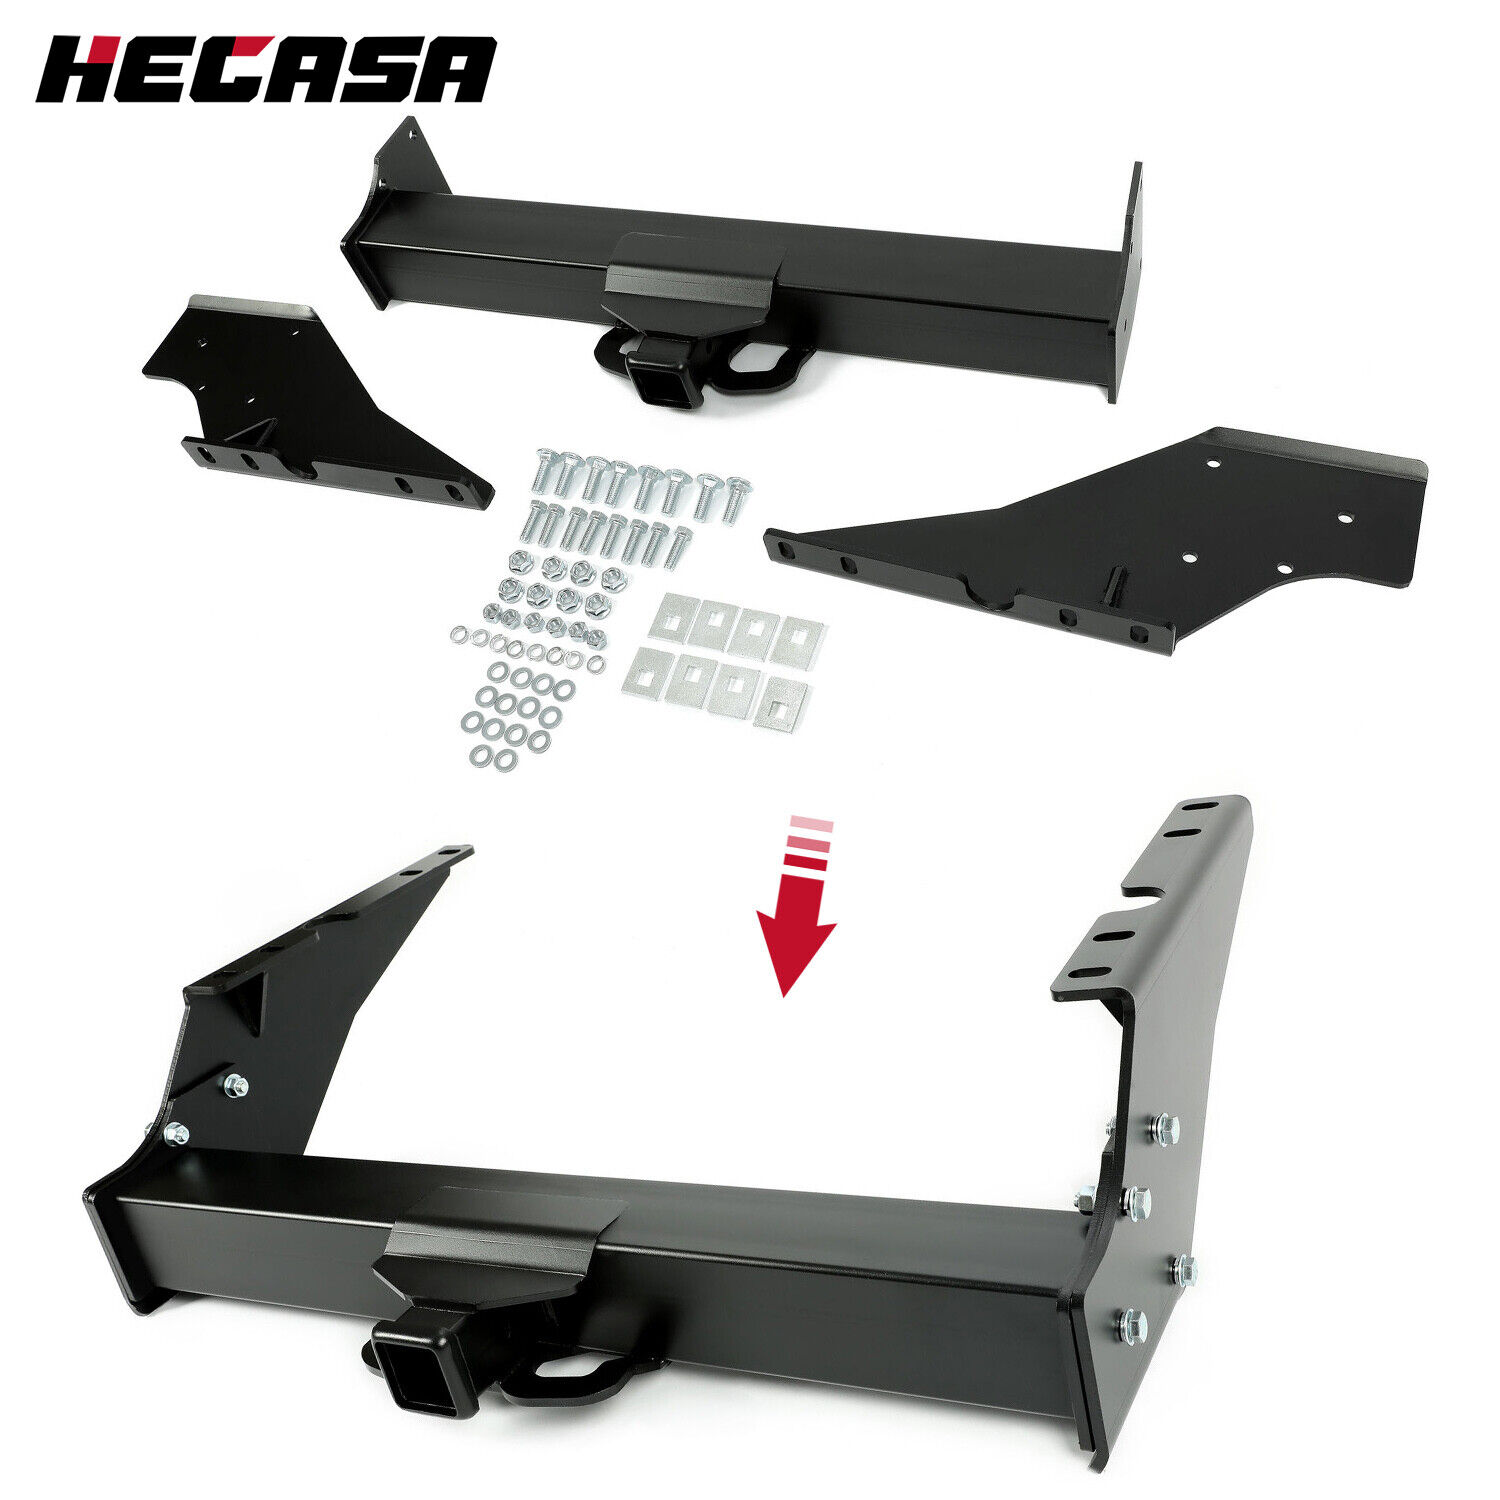 New Class 5 Trailer Hitch V Class For Ford F-250 F-350 F-450 Super Duty 15410